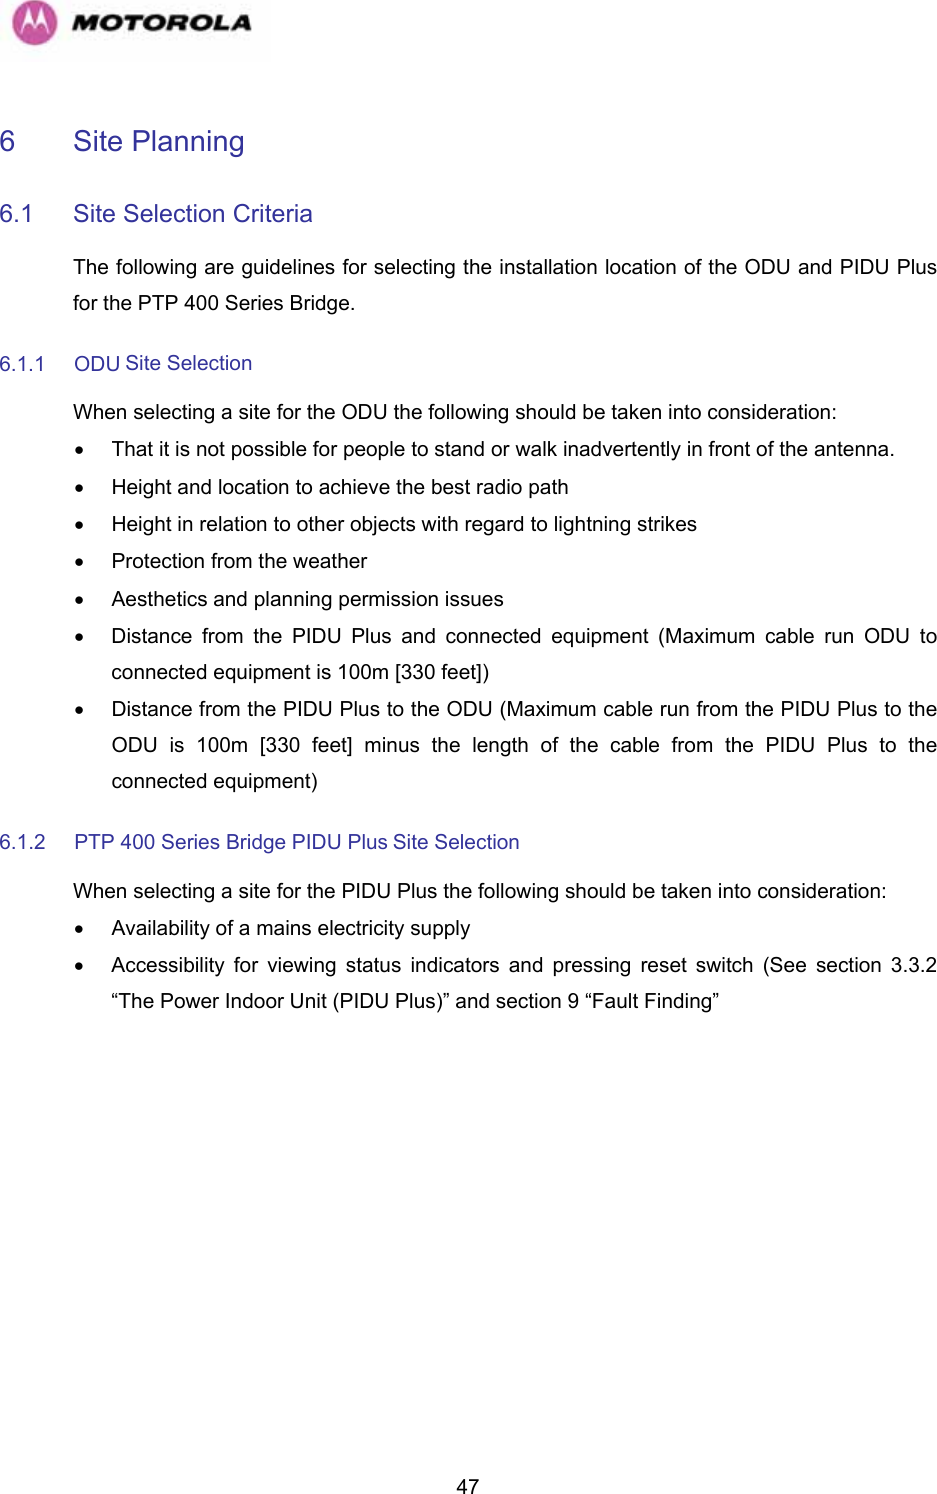   476 Site Planning  6.1  Site Selection Criteria  The following are guidelines for selecting the installation location of the ODU and PIDU Plus for the PTP 400 Series Bridge.  6.1.1 ODU Site Selection  When selecting a site for the ODU the following should be taken into consideration:  •  That it is not possible for people to stand or walk inadvertently in front of the antenna.  •  Height and location to achieve the best radio path  •  Height in relation to other objects with regard to lightning strikes  •  Protection from the weather  •  Aesthetics and planning permission issues  •  Distance from the PIDU Plus and connected equipment (Maximum cable run ODU to connected equipment is 100m [330 feet])  •  Distance from the PIDU Plus to the ODU (Maximum cable run from the PIDU Plus to the ODU is 100m [330 feet] minus the length of the cable from the PIDU Plus to the connected equipment)  6.1.2  PTP 400 Series Bridge PIDU Plus Site Selection  When selecting a site for the PIDU Plus the following should be taken into consideration:  •  Availability of a mains electricity supply  •  Accessibility for viewing status indicators and pressing reset switch (See section 3.3.2 “The Power Indoor Unit (PIDU Plus)” and section 9 “Fault Finding”  